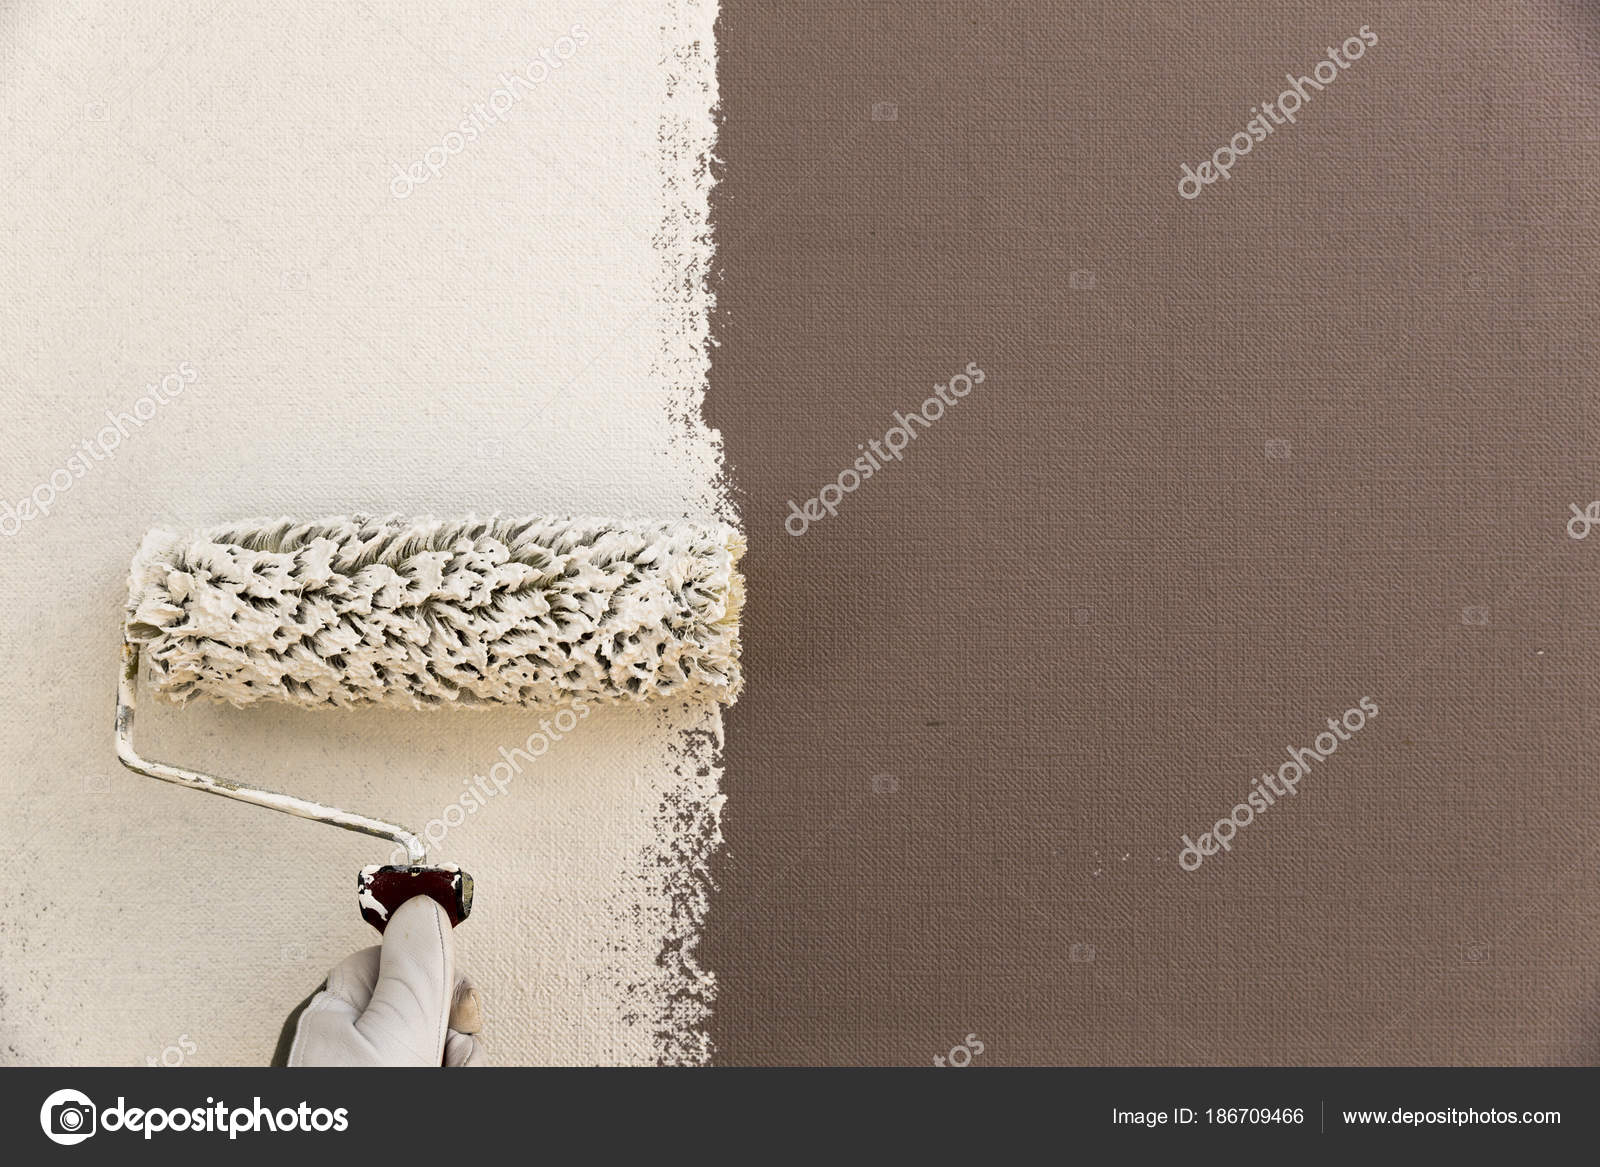 Decorators Hand Painting Wall White With Roller Stock Photo